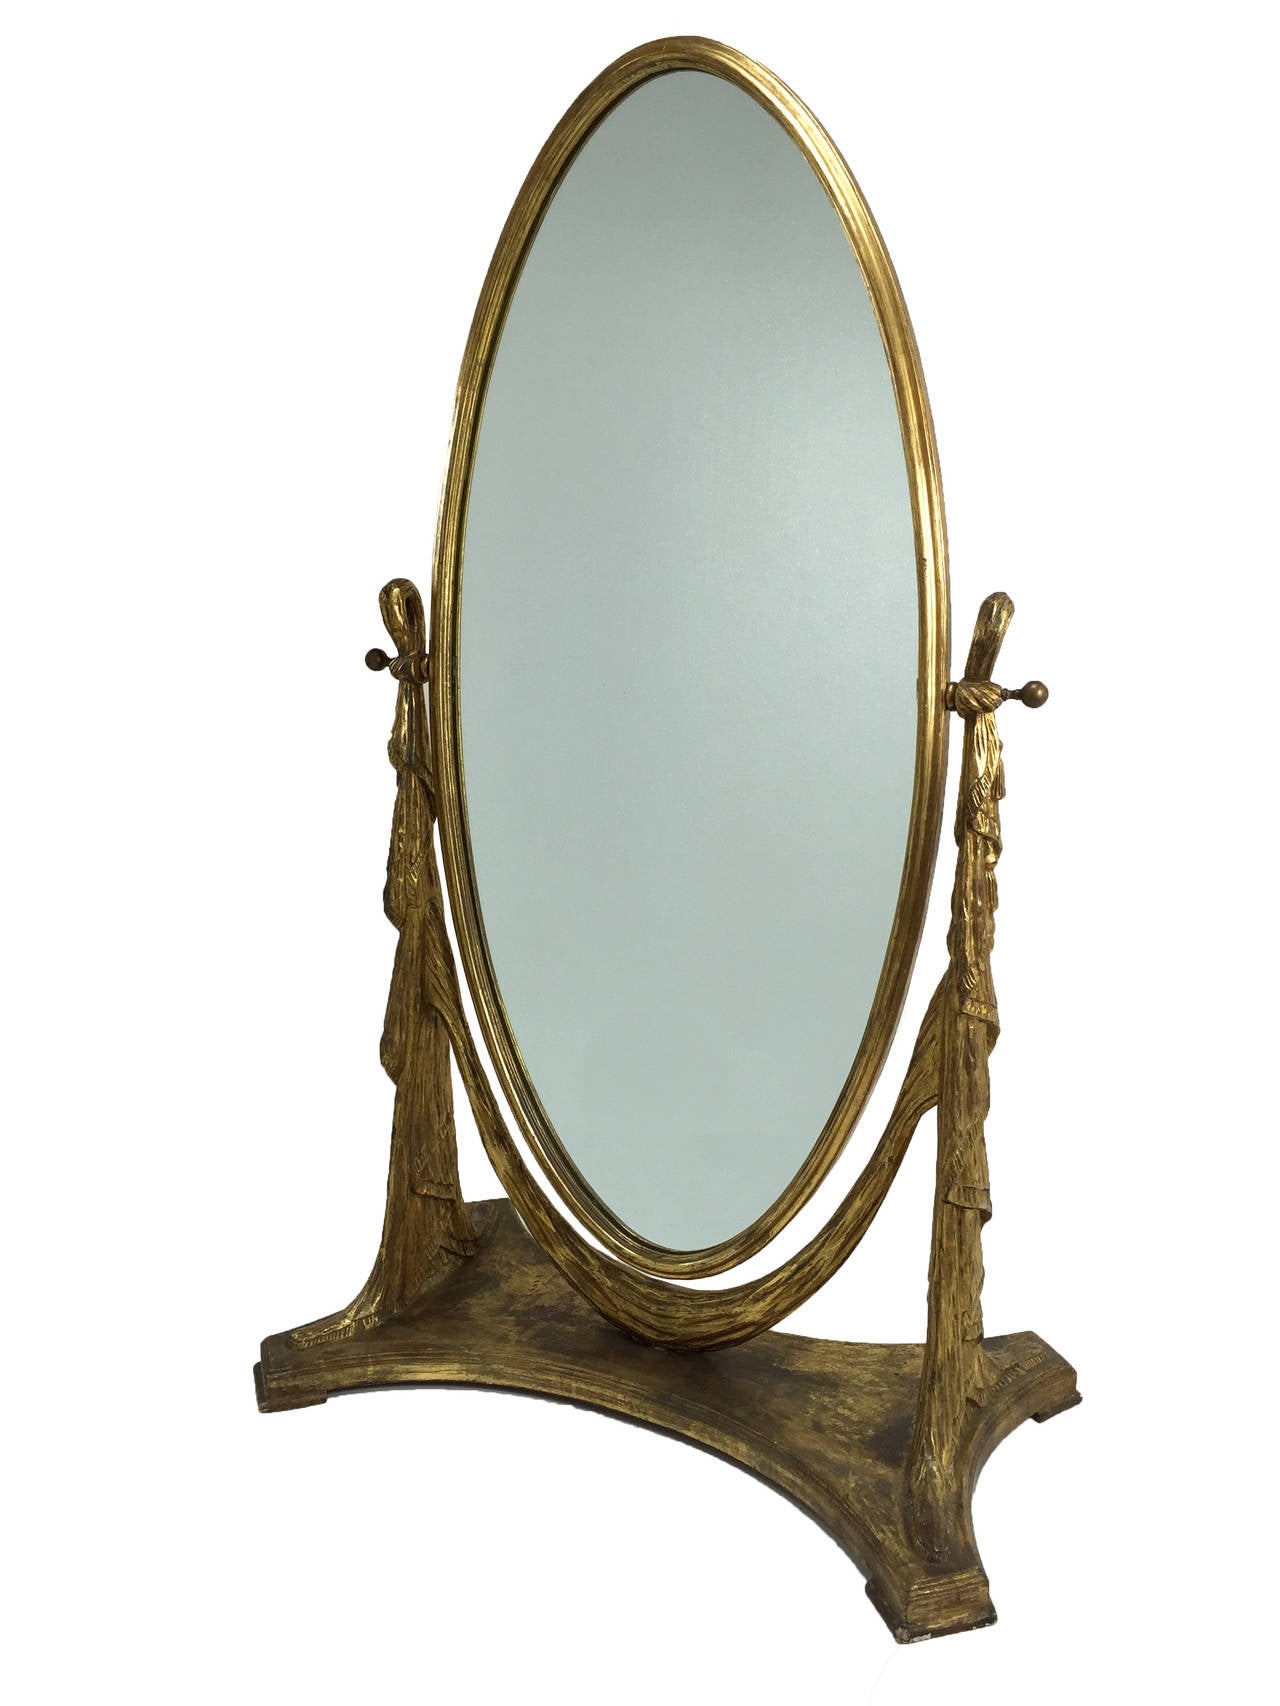 Storybook carved drapery style gilt wood floor mirror at nearly six feet high. Loaded with glamour and movement. Evidence of a break and repair of foot along front of base is barely noticeable.